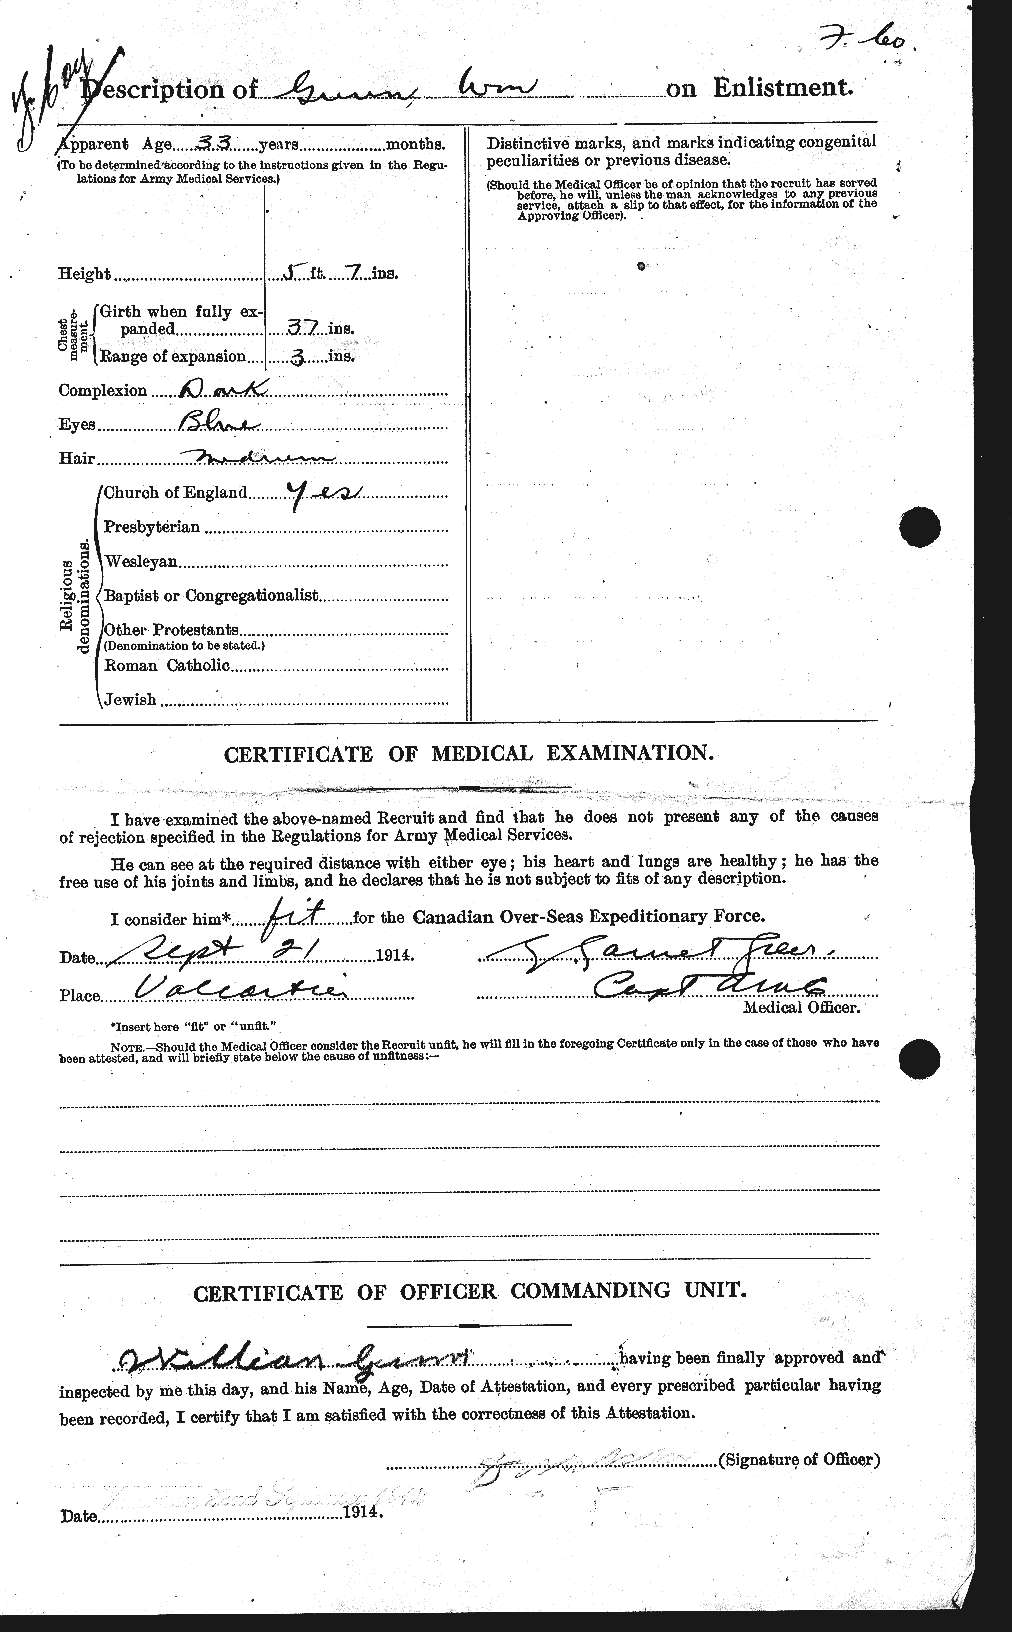 Personnel Records of the First World War - CEF 369354b